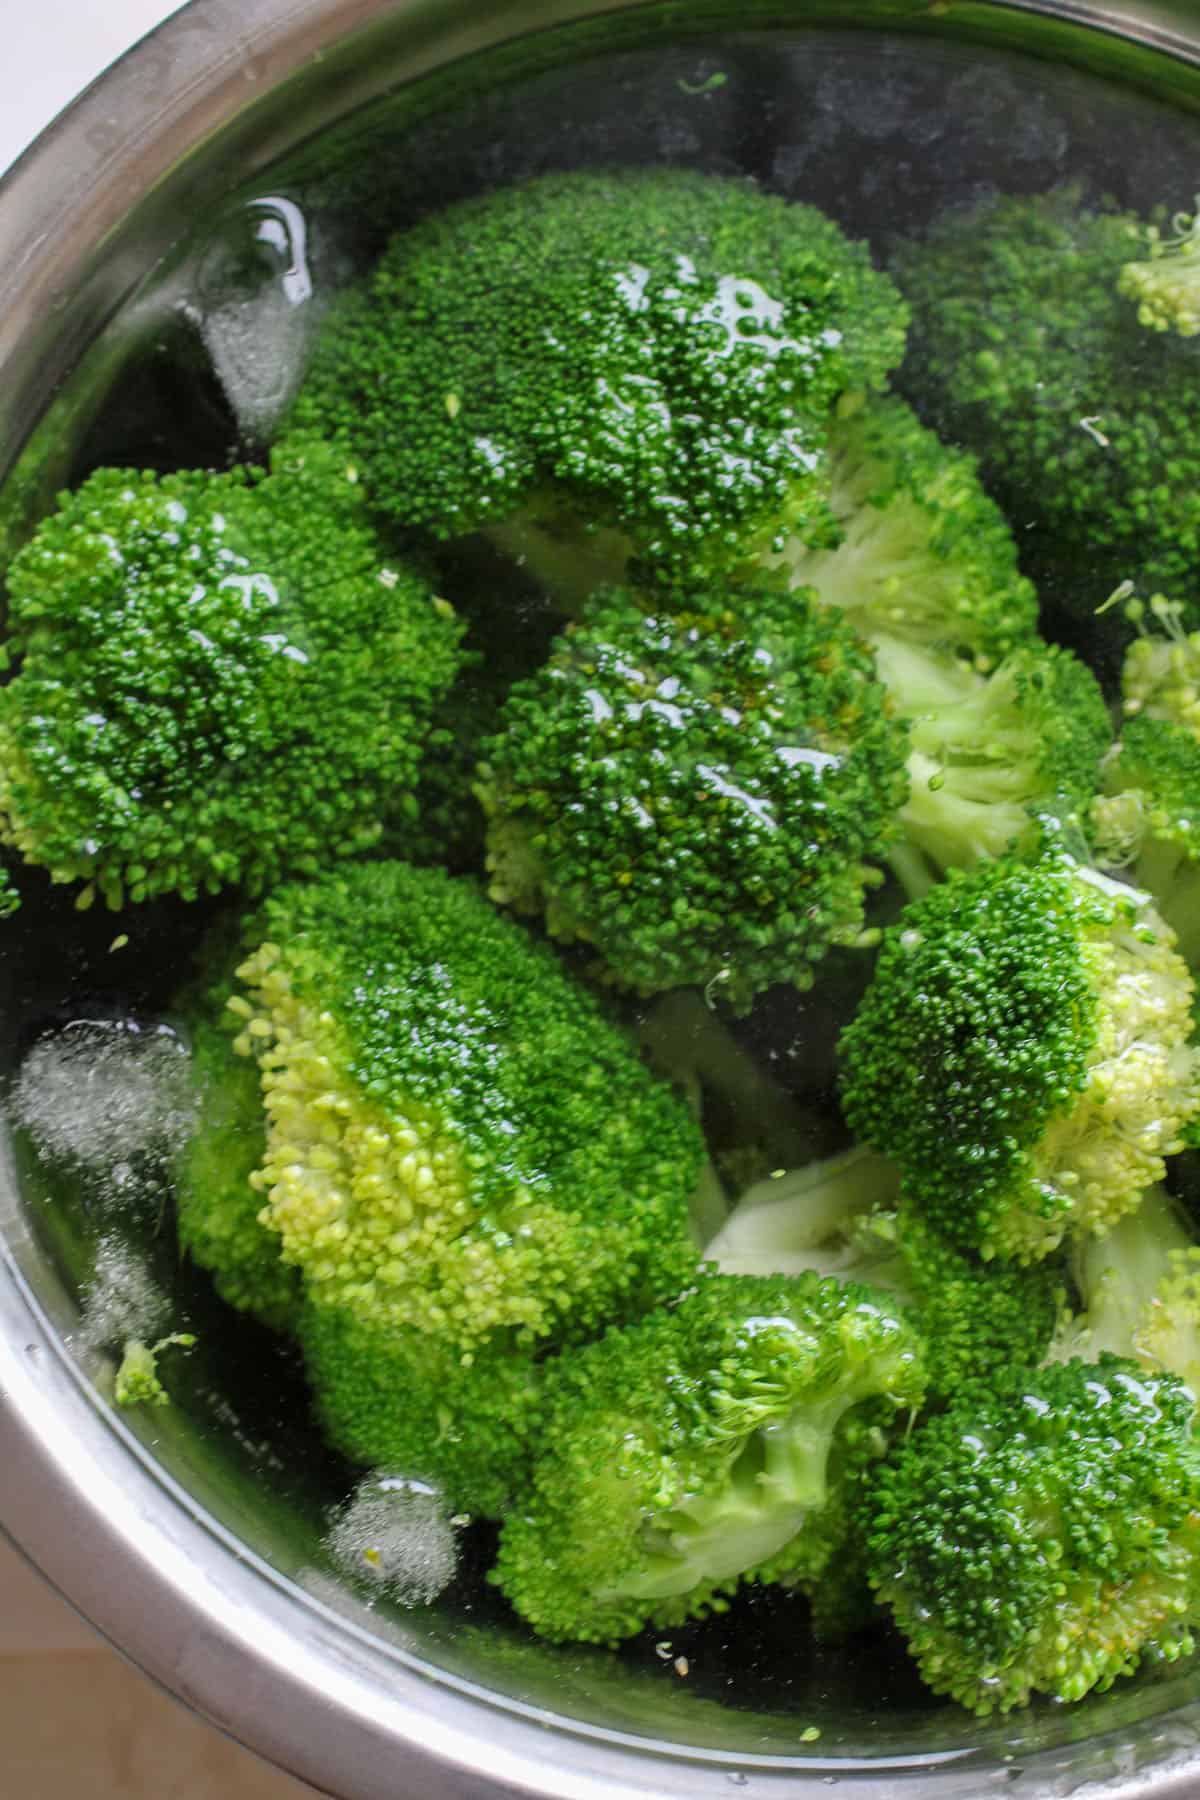 blanching broccoli florets in a bowl of iced water